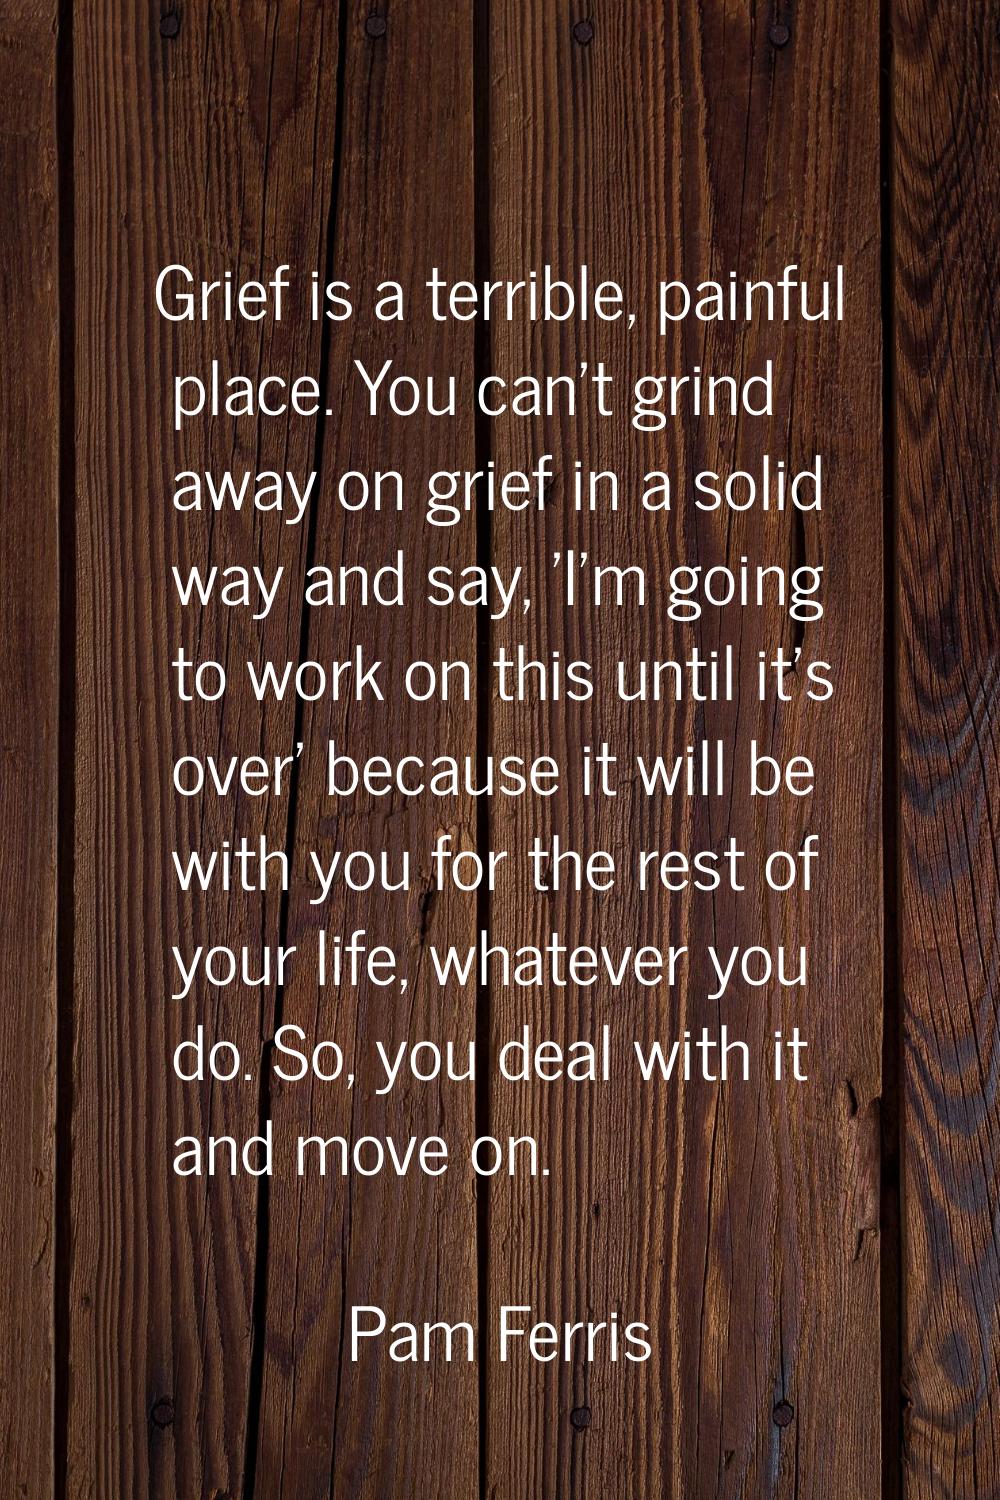 Grief is a terrible, painful place. You can't grind away on grief in a solid way and say, 'I'm goin